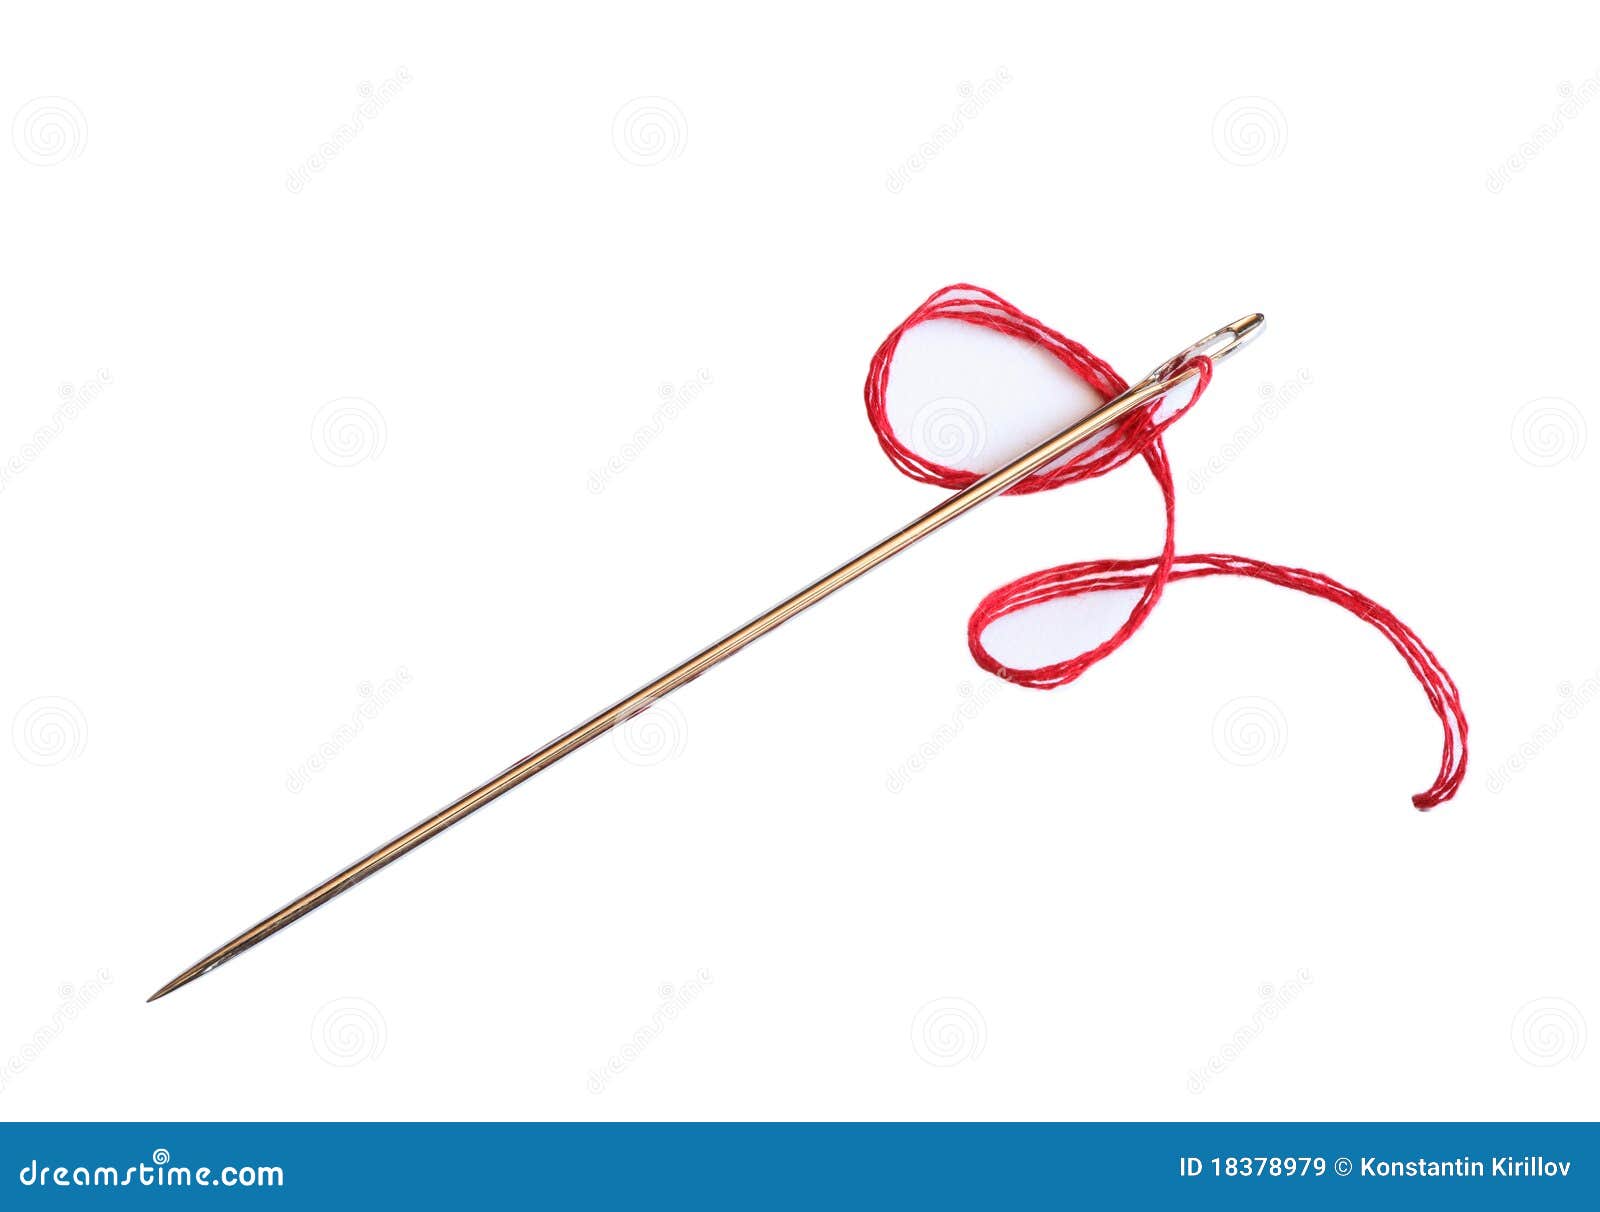 Needle and Thread stock image. Image of isolated, tailor - 18378979